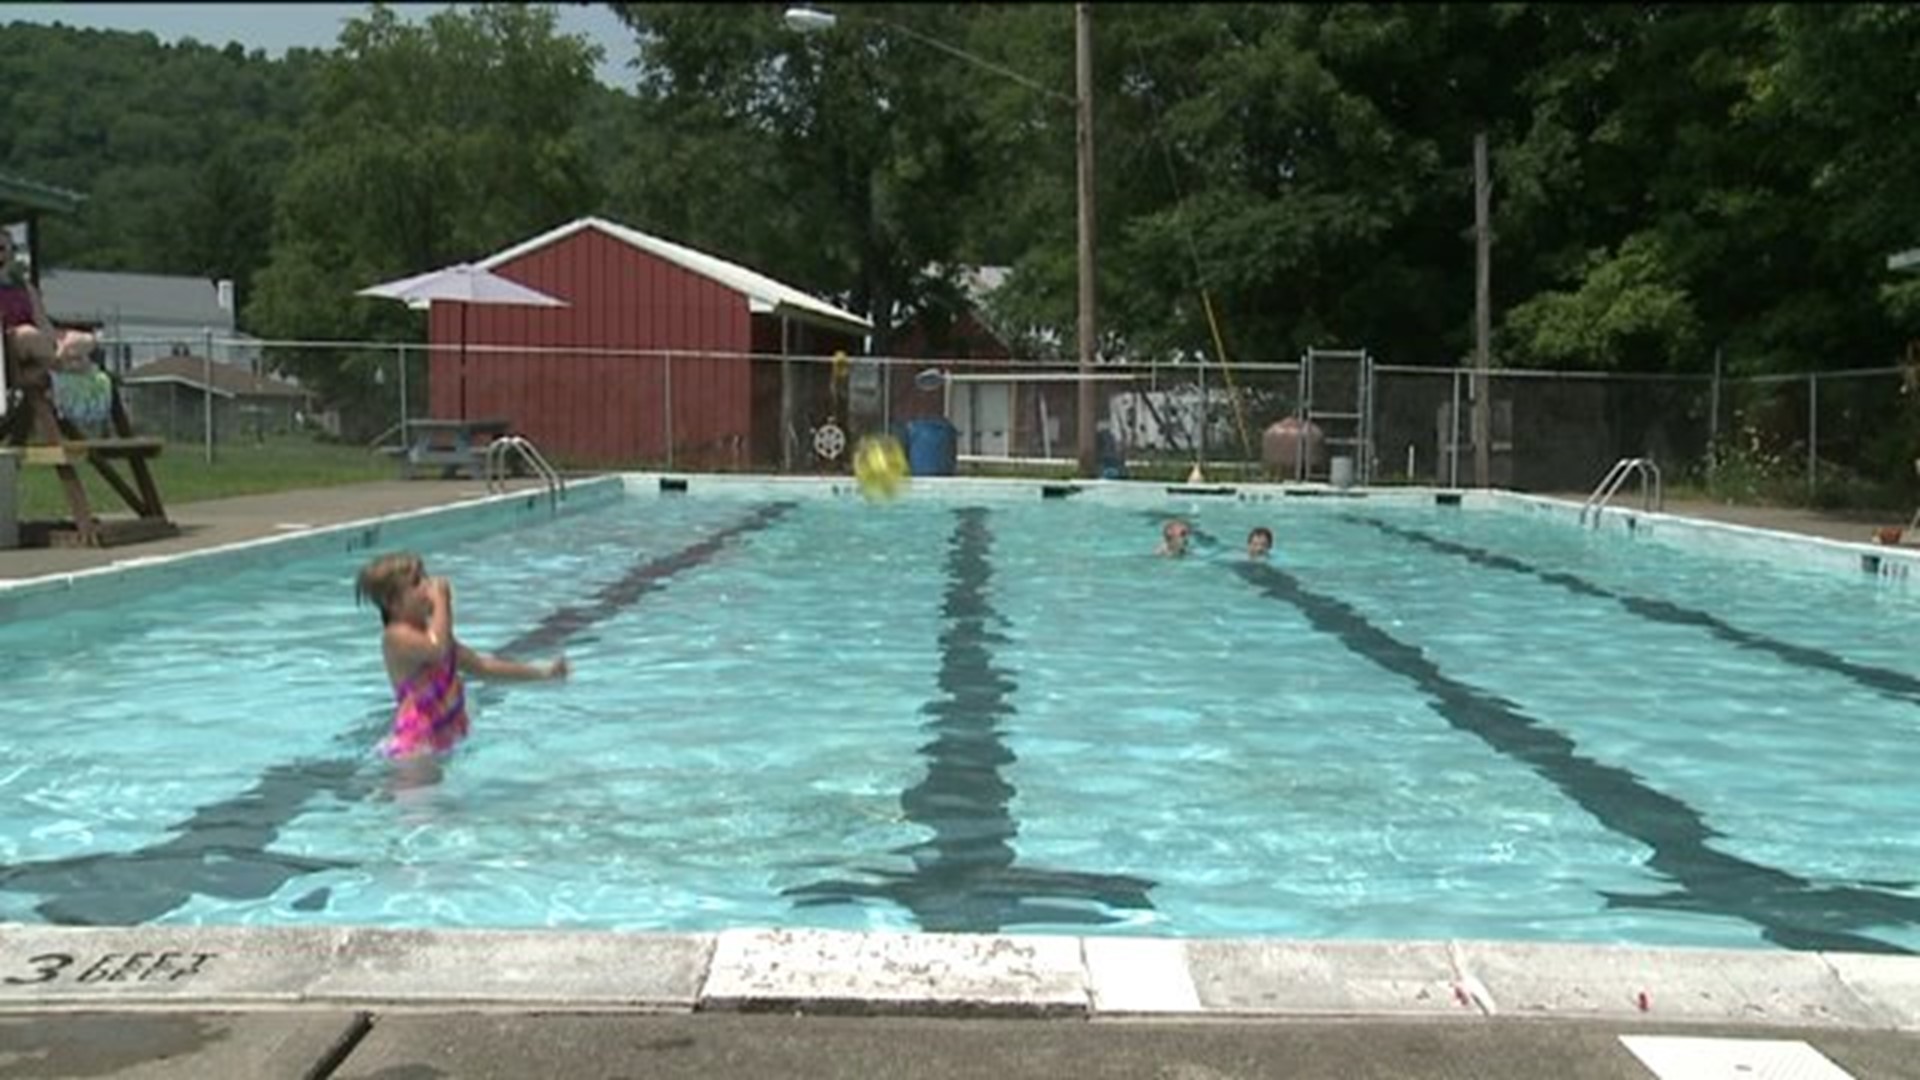 Susquehanna County Pool in Need of Repairs